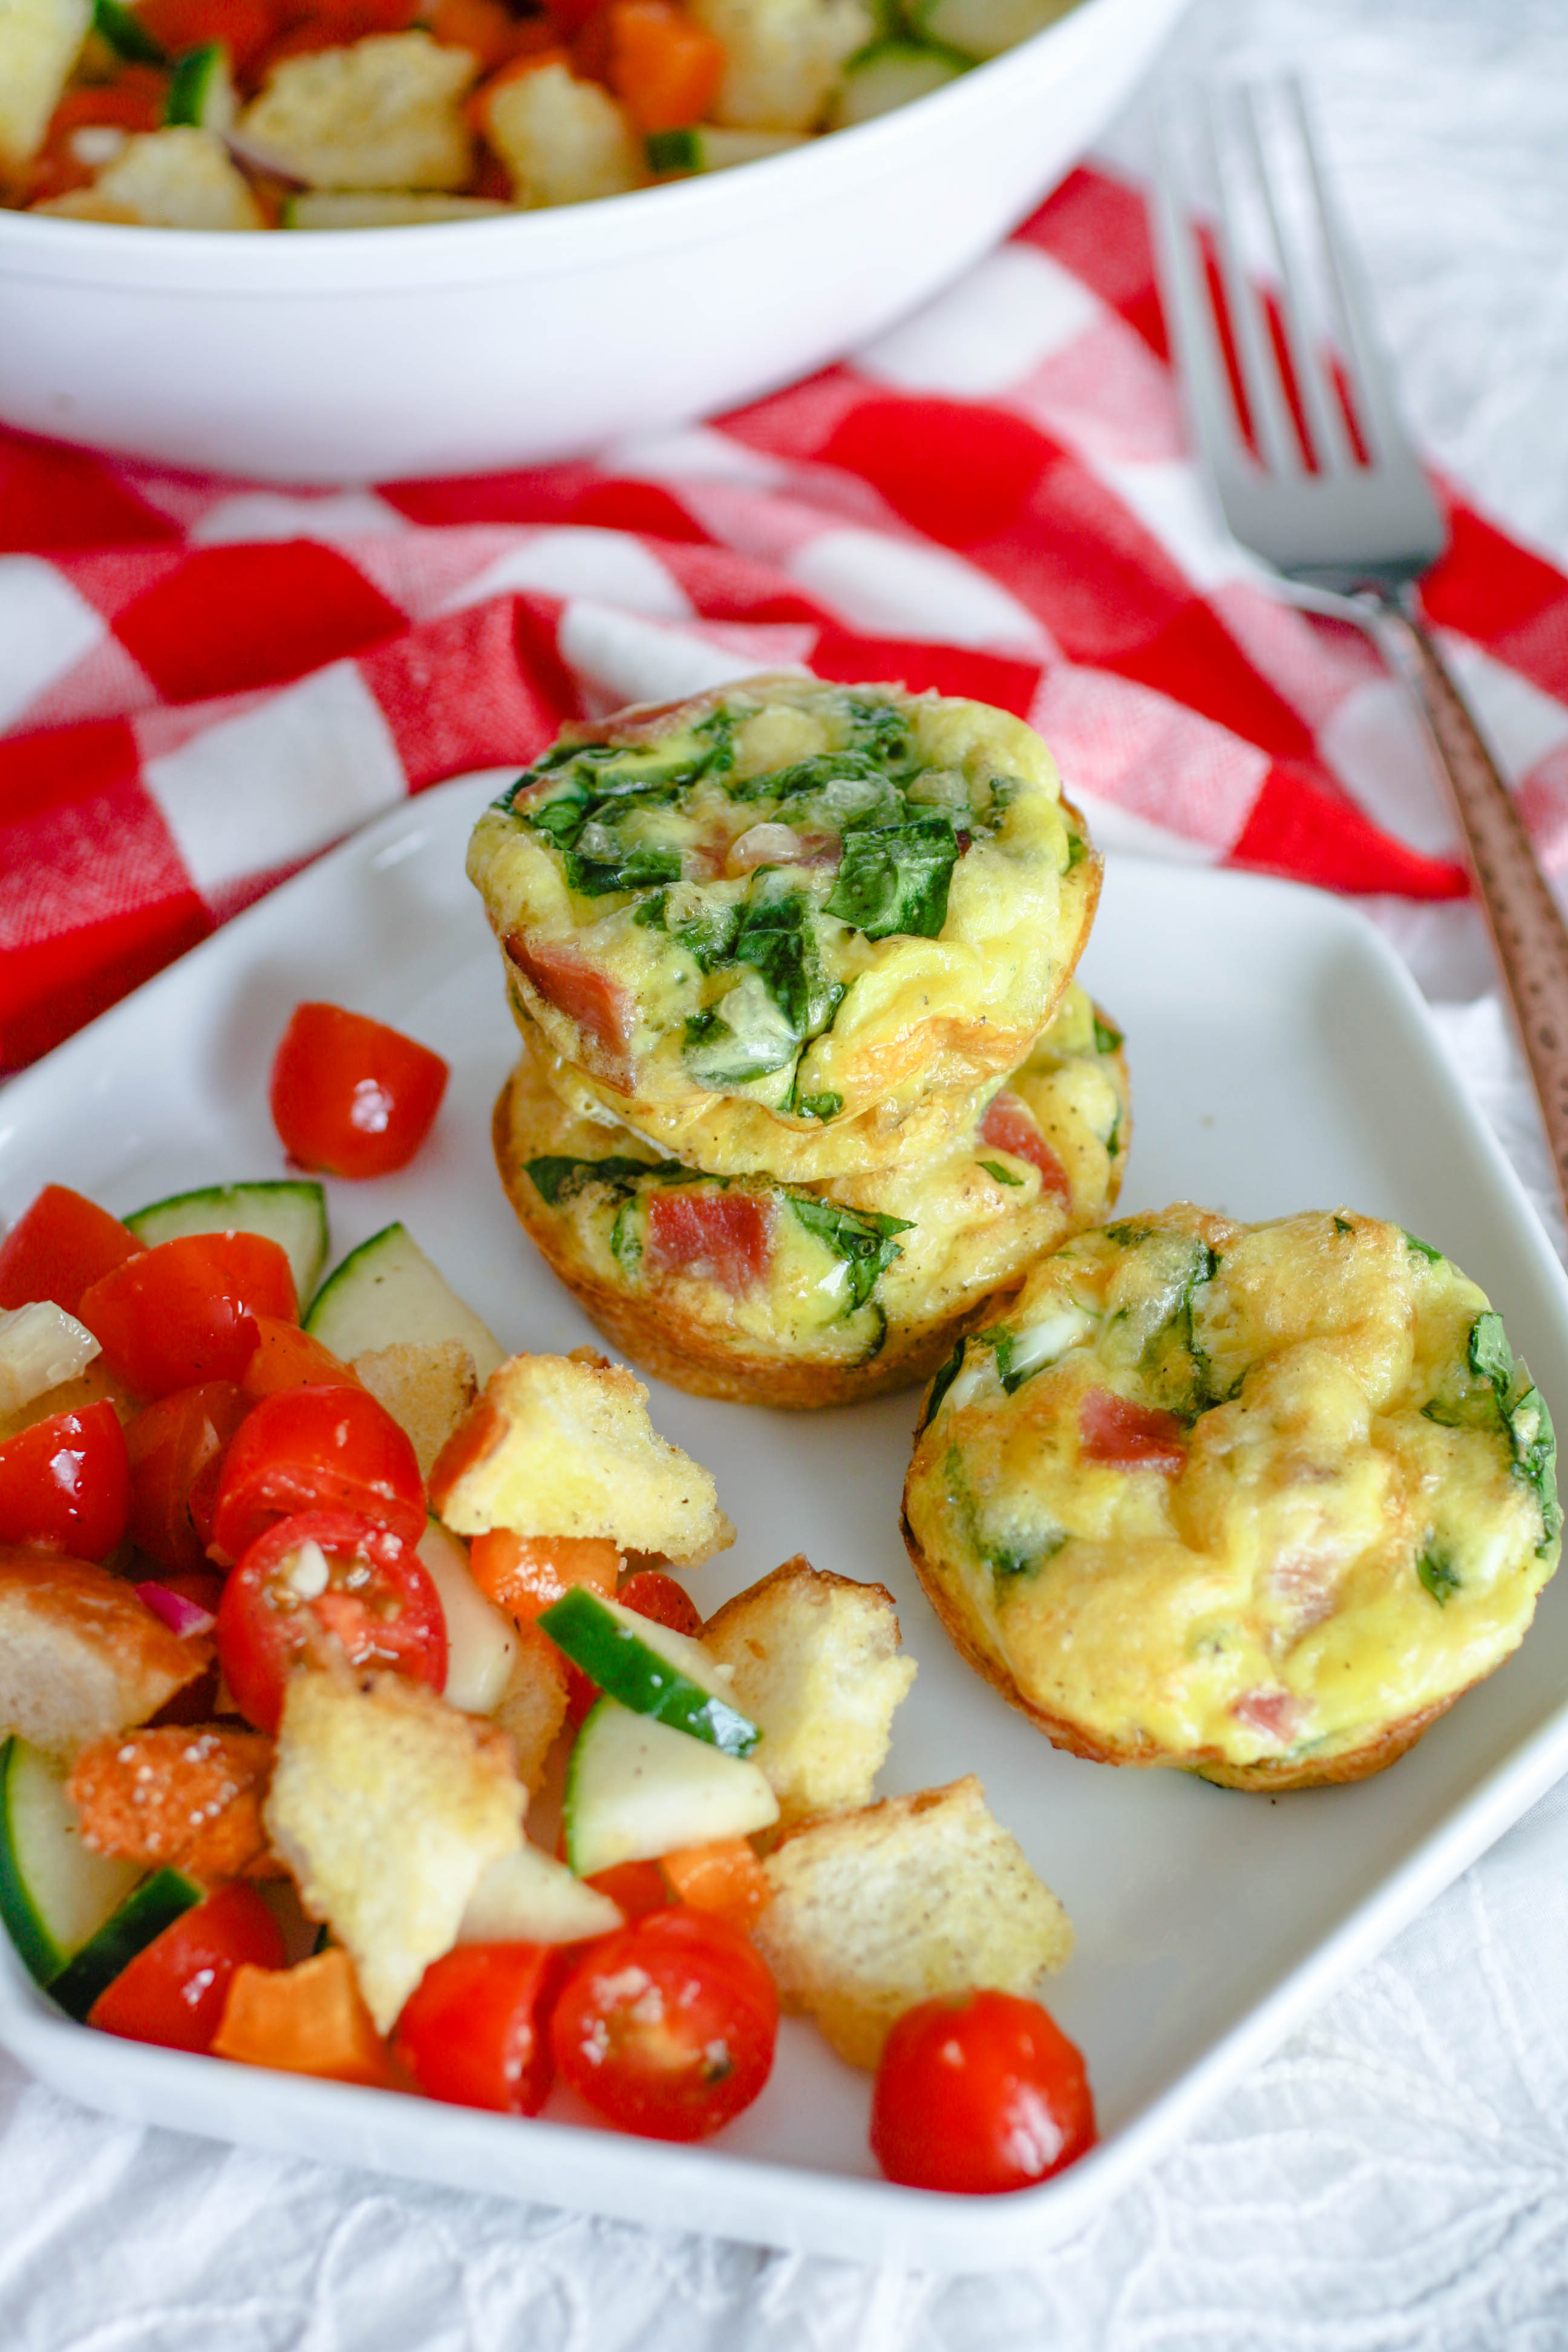 Ham, Swiss, and Spinach Egg Muffin Cups are a treat for any meal. Ham, Swiss, and Spinach Egg Muffin Cups are a great breakfast option.